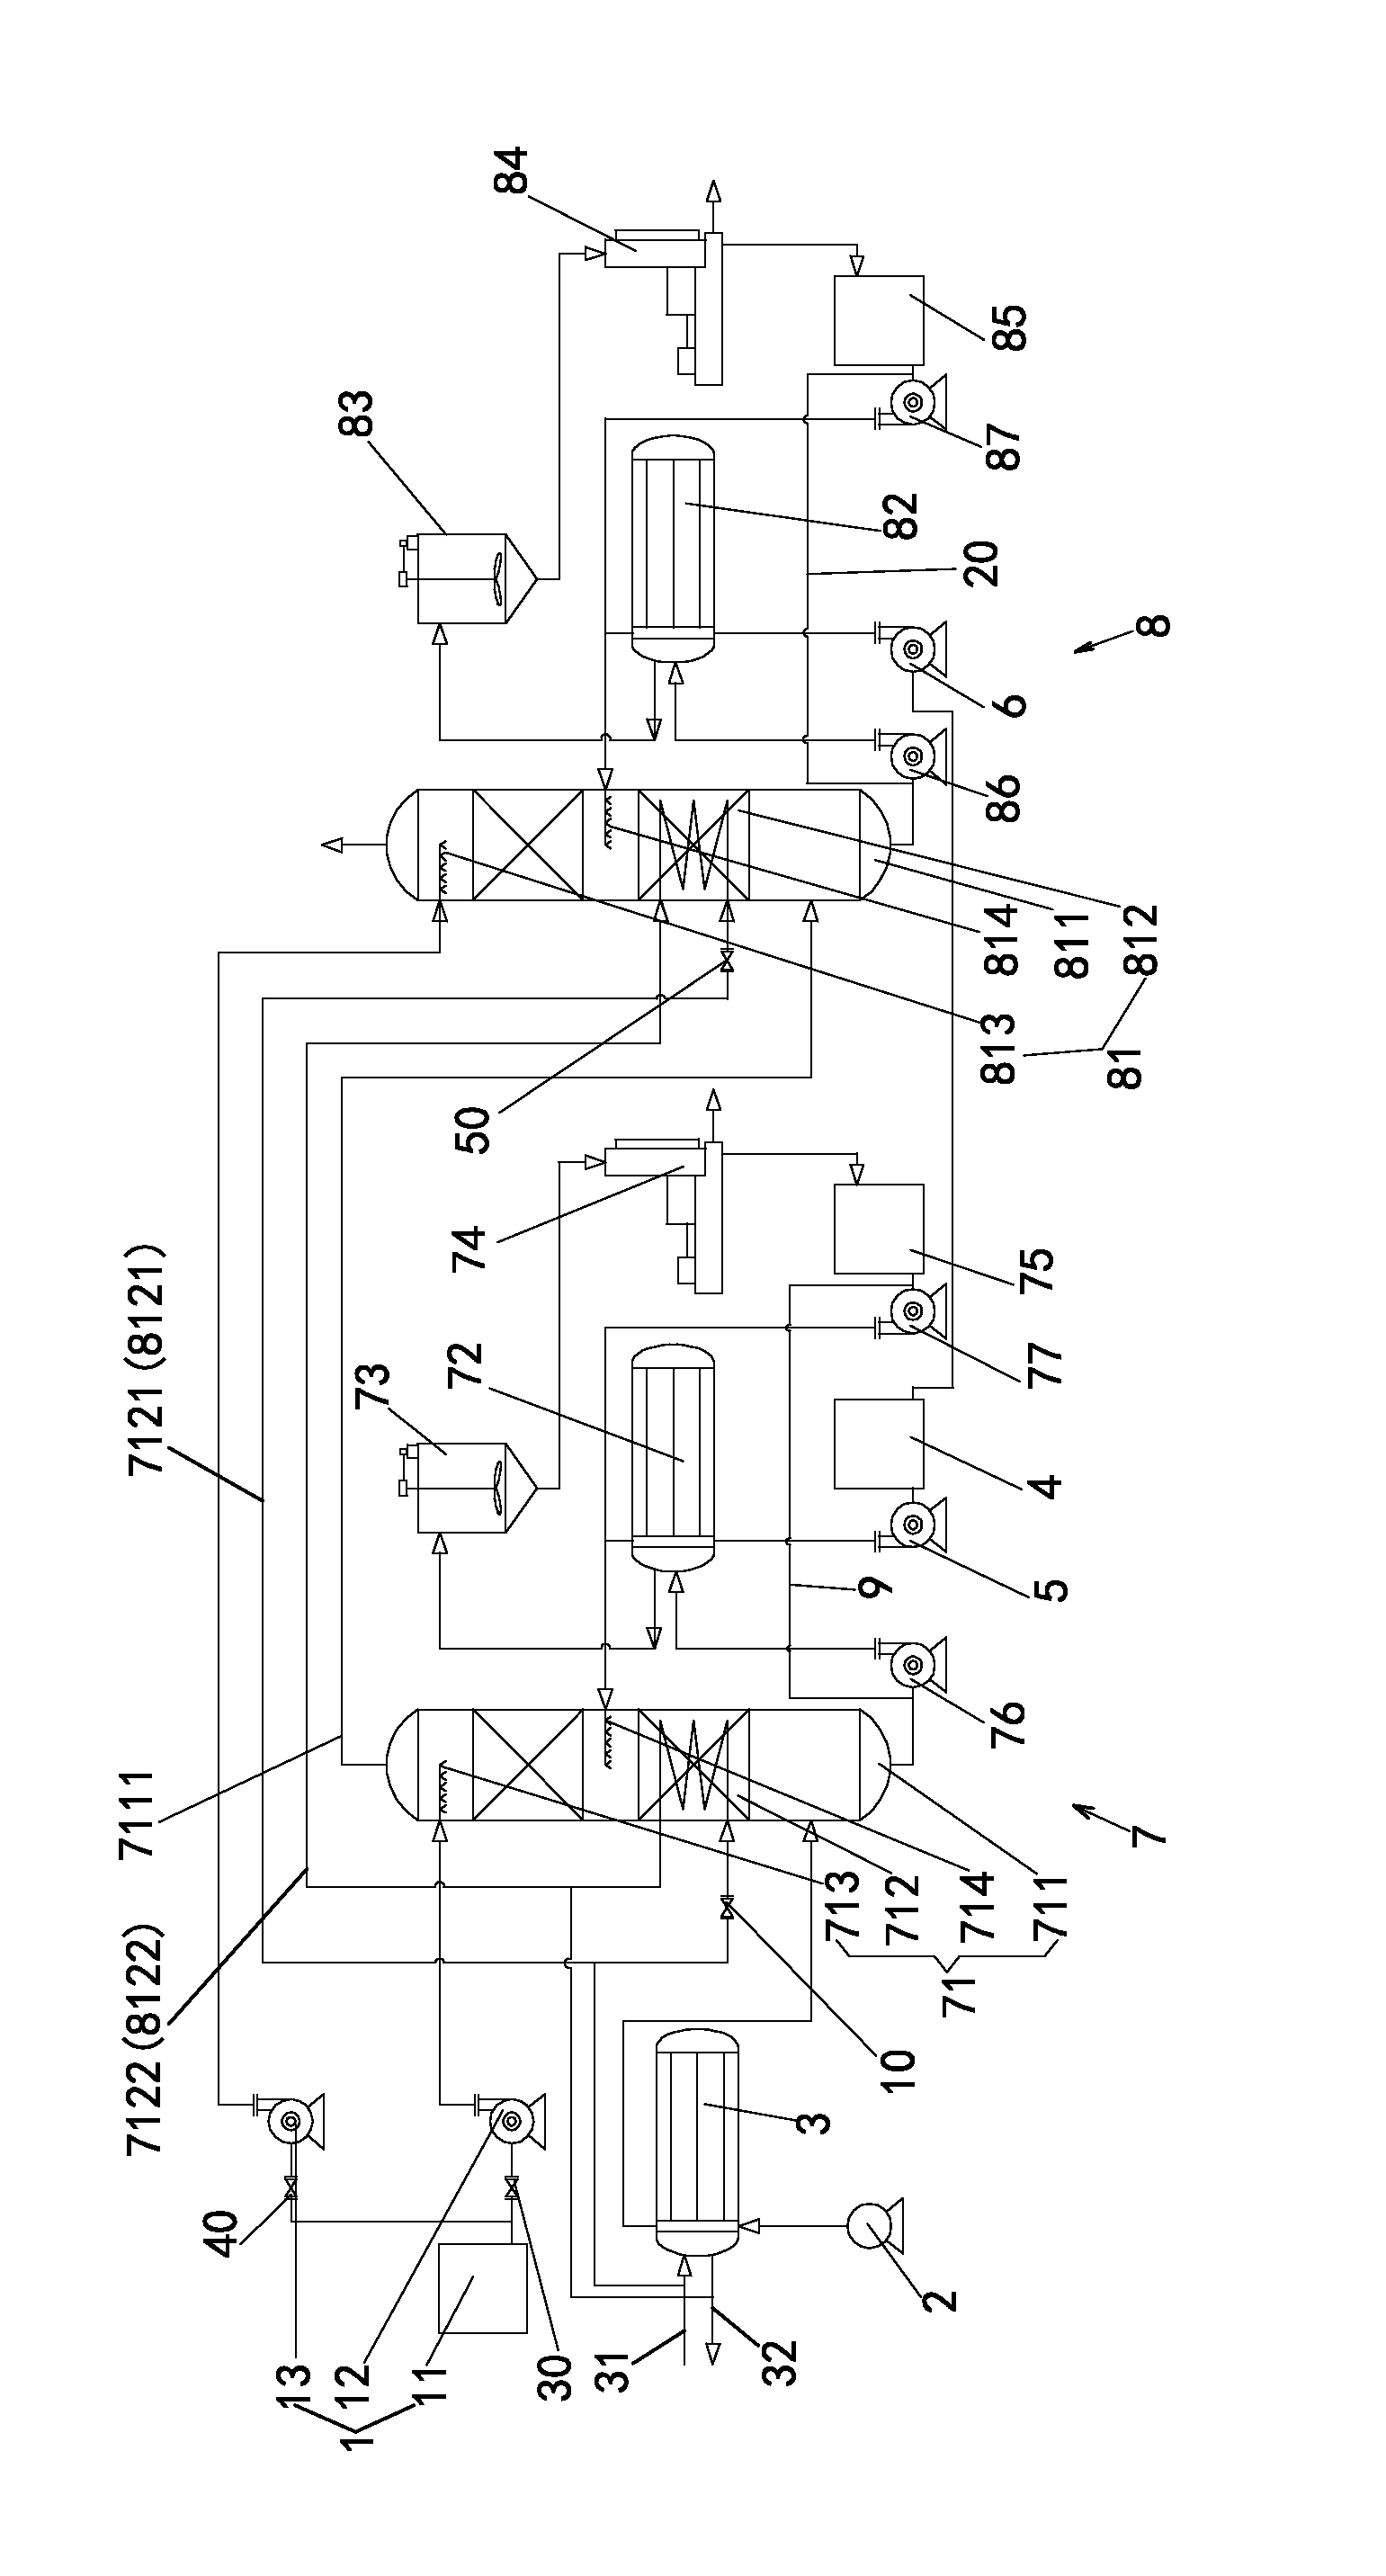 System and process for trapping sulfur dioxide and carbon dioxide by ammonia absorption at atmospheric pressure